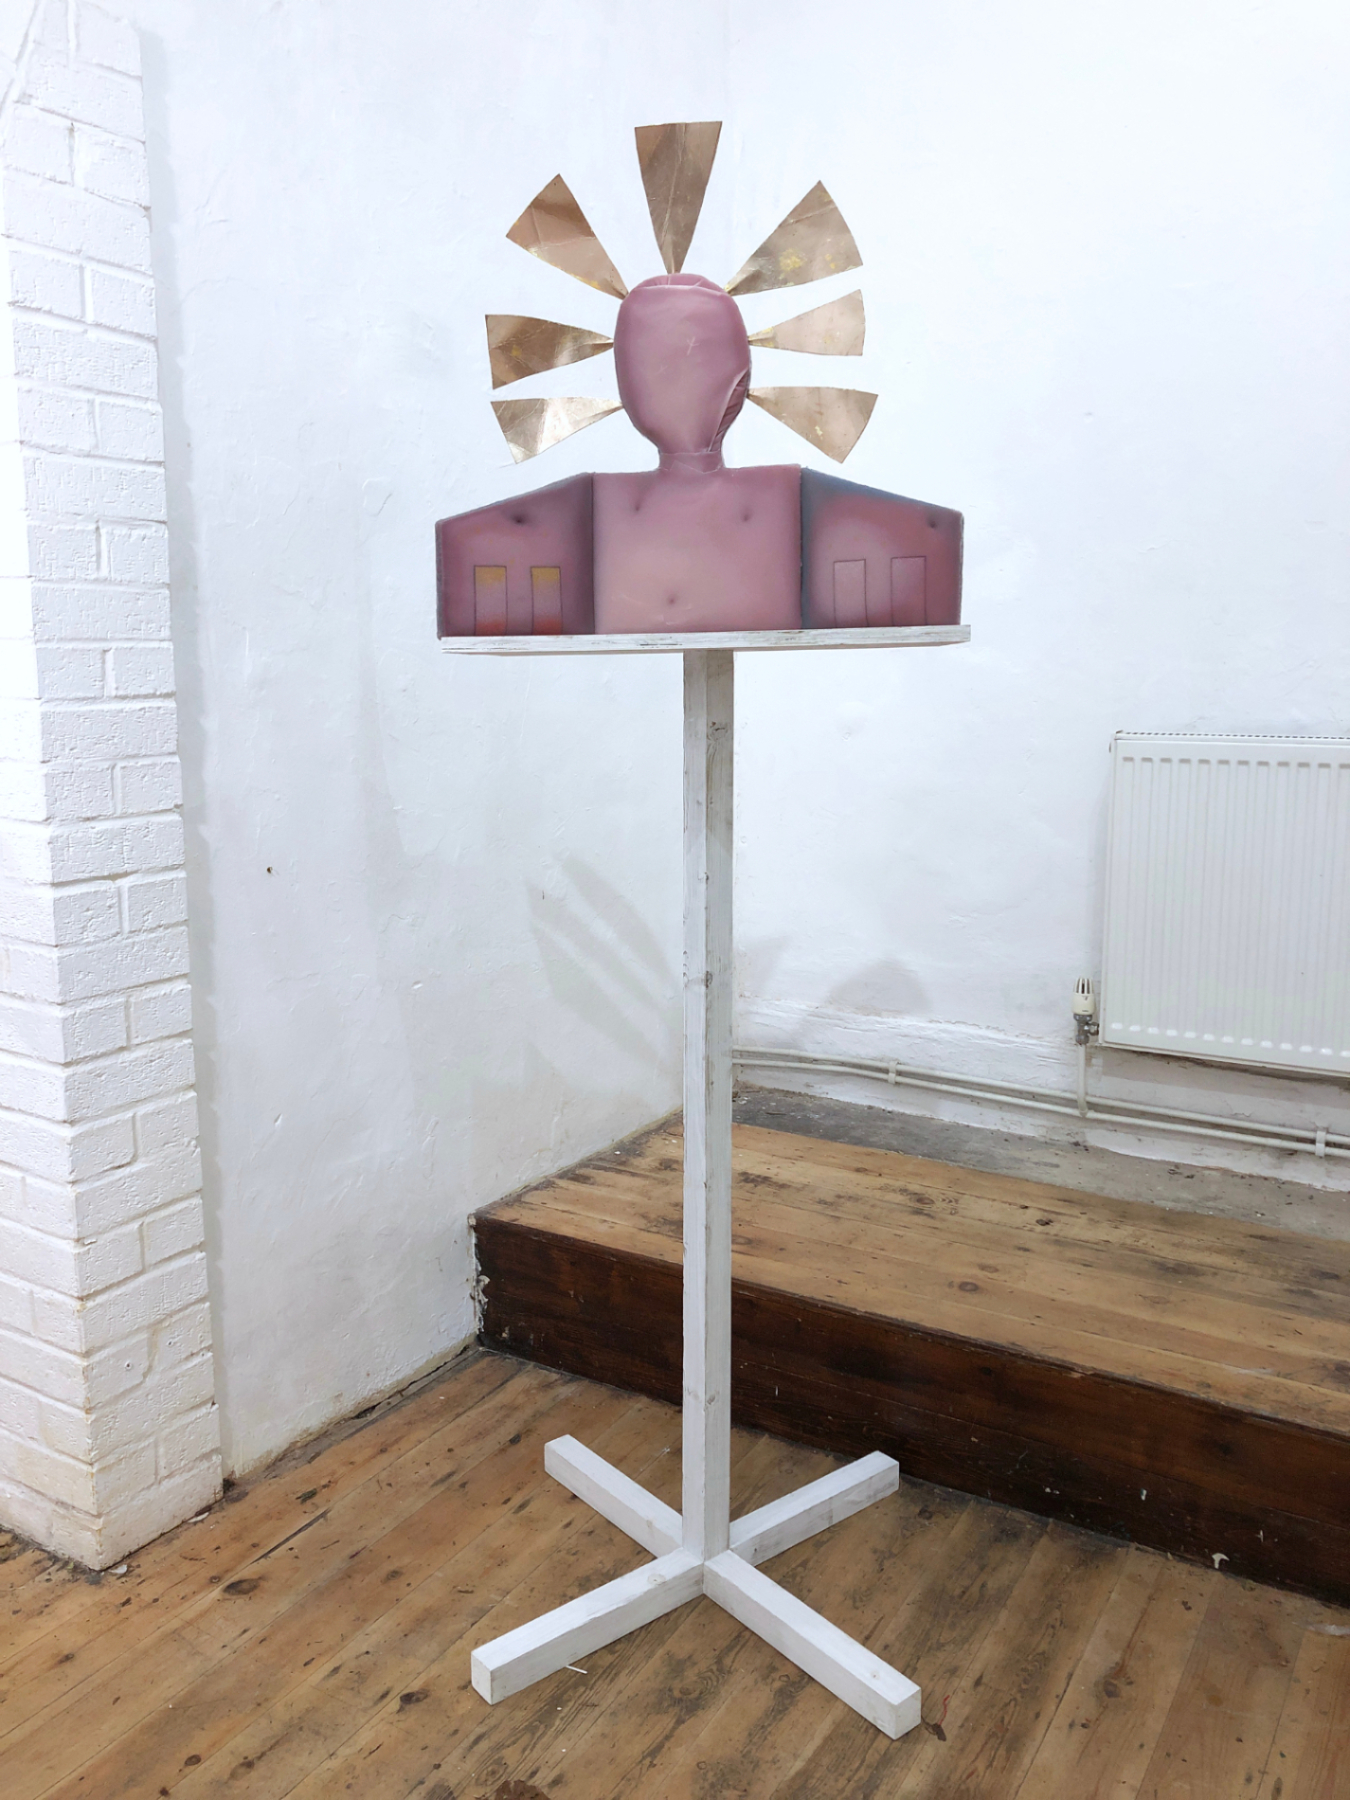 Bird Feeder 3, 2022; Silicone, aluminium, ink, card, carbon fibre rod, gold leaf Stand: Wood, lime. Dimensions Variable